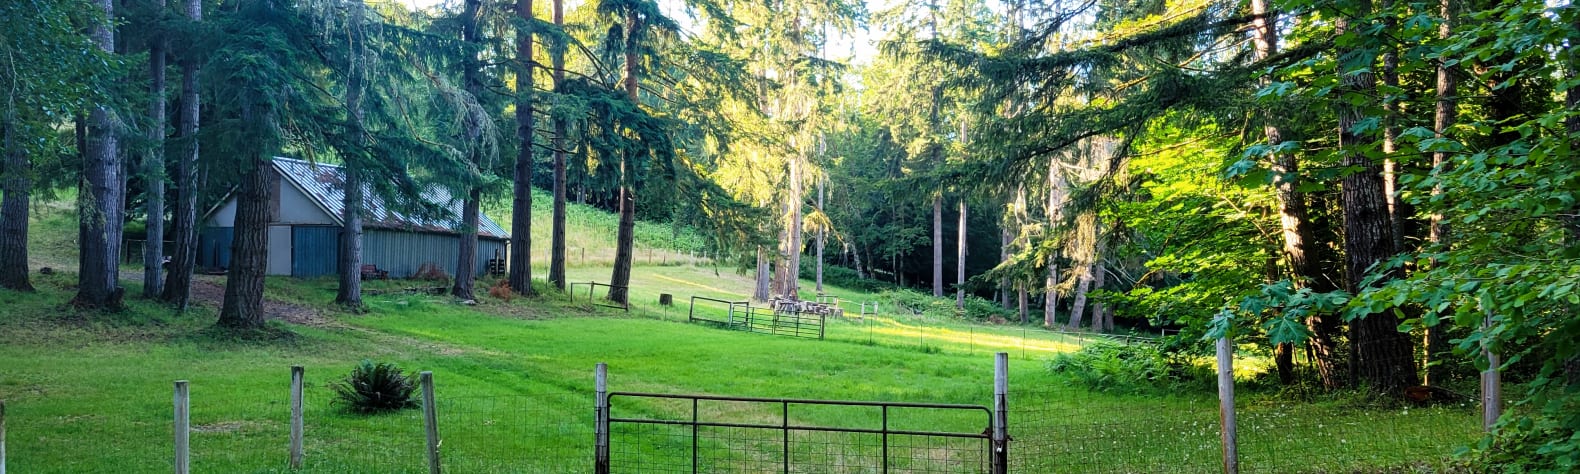 Glencove pasture and forest trails